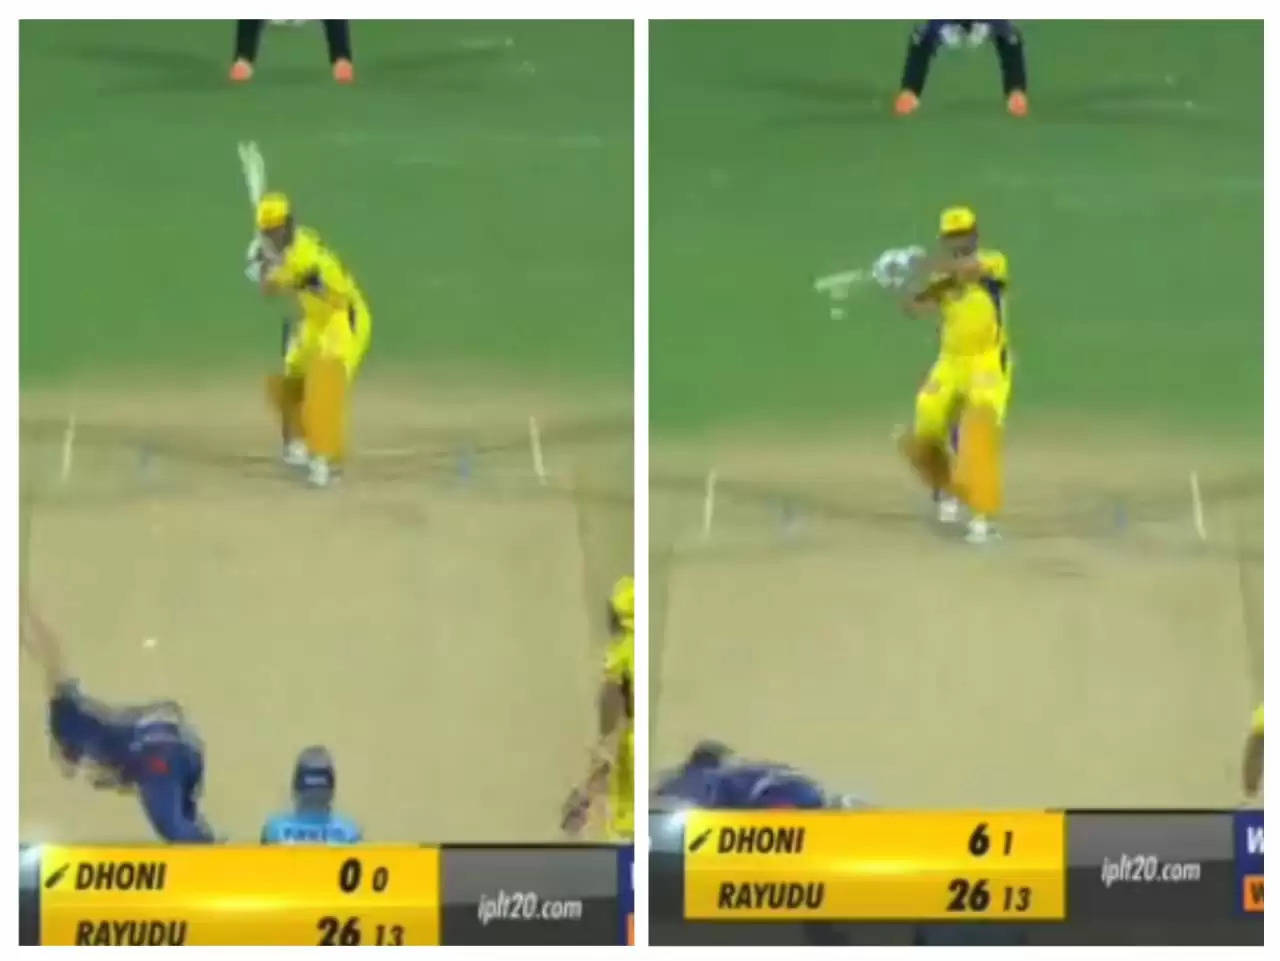 MS Dhoni hit two consecutive sixes in the last over.